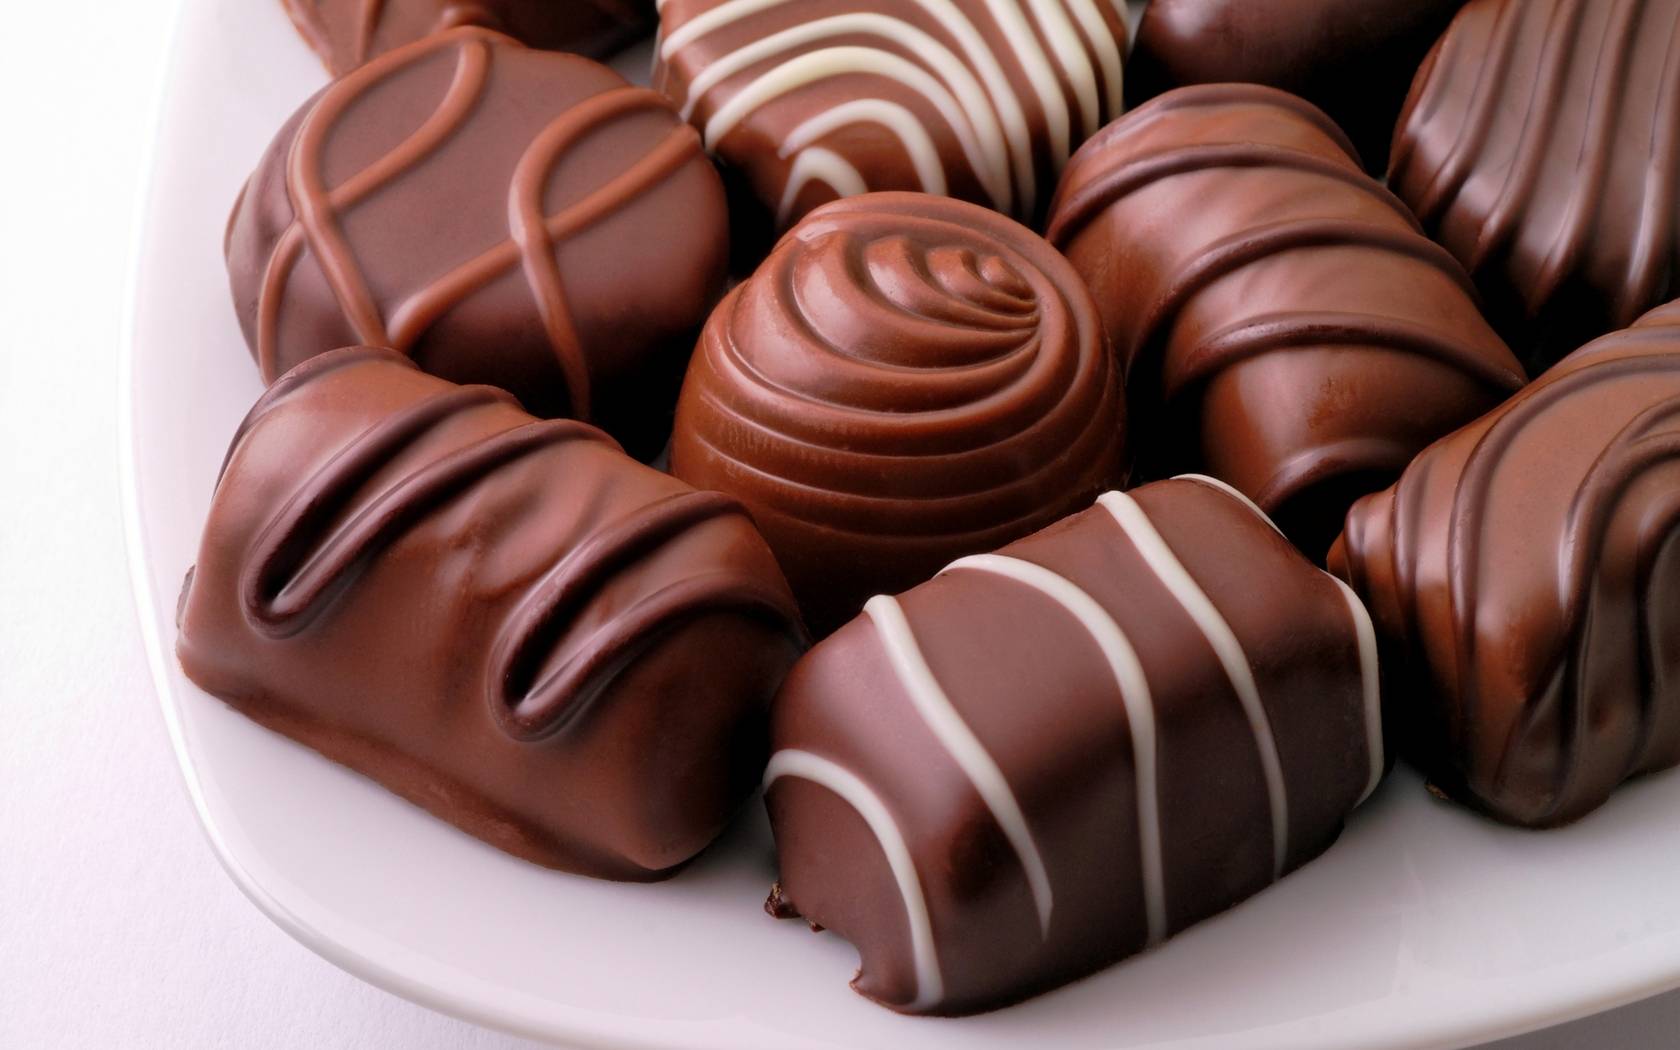 http://stuffpoint.com/sweets/image/43235-sweets-chocolate-sweets.jpg